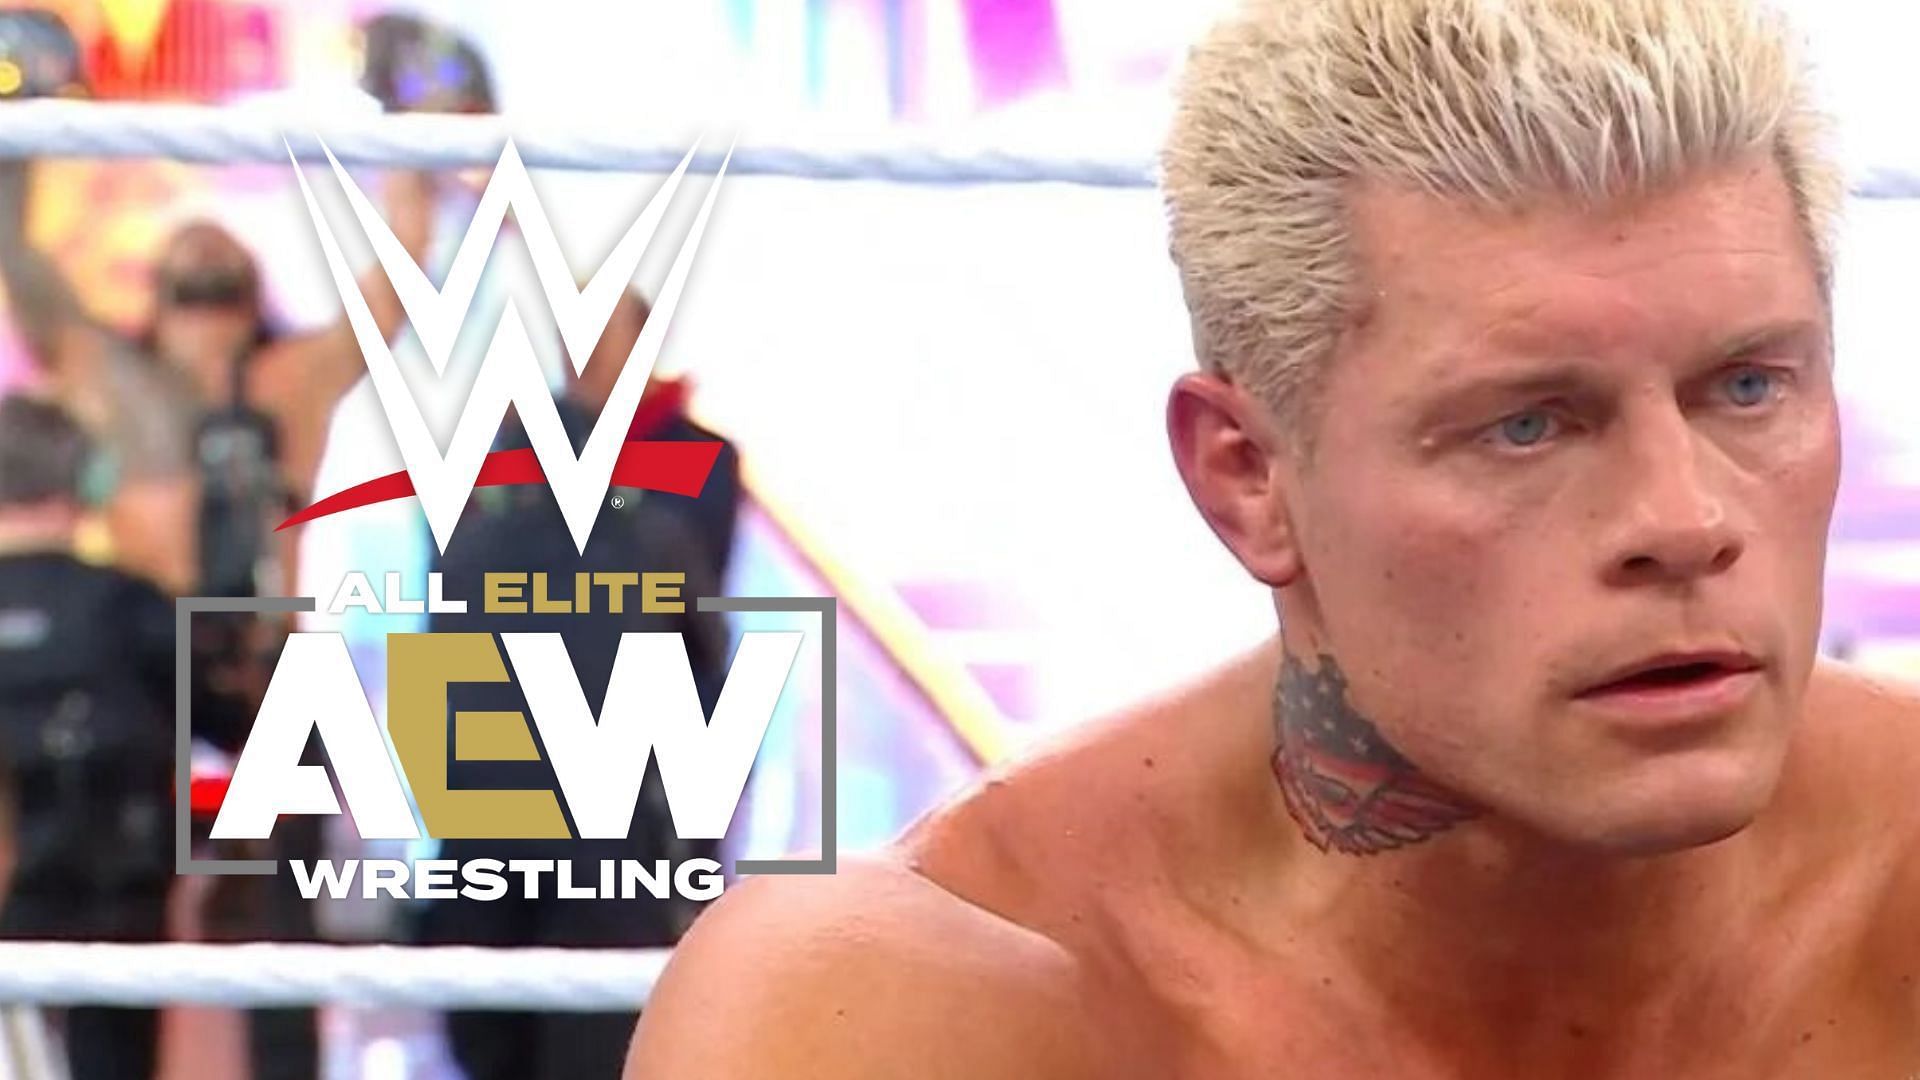 Cody Rhodes lost to Roman Reigns at WrestleMania 39